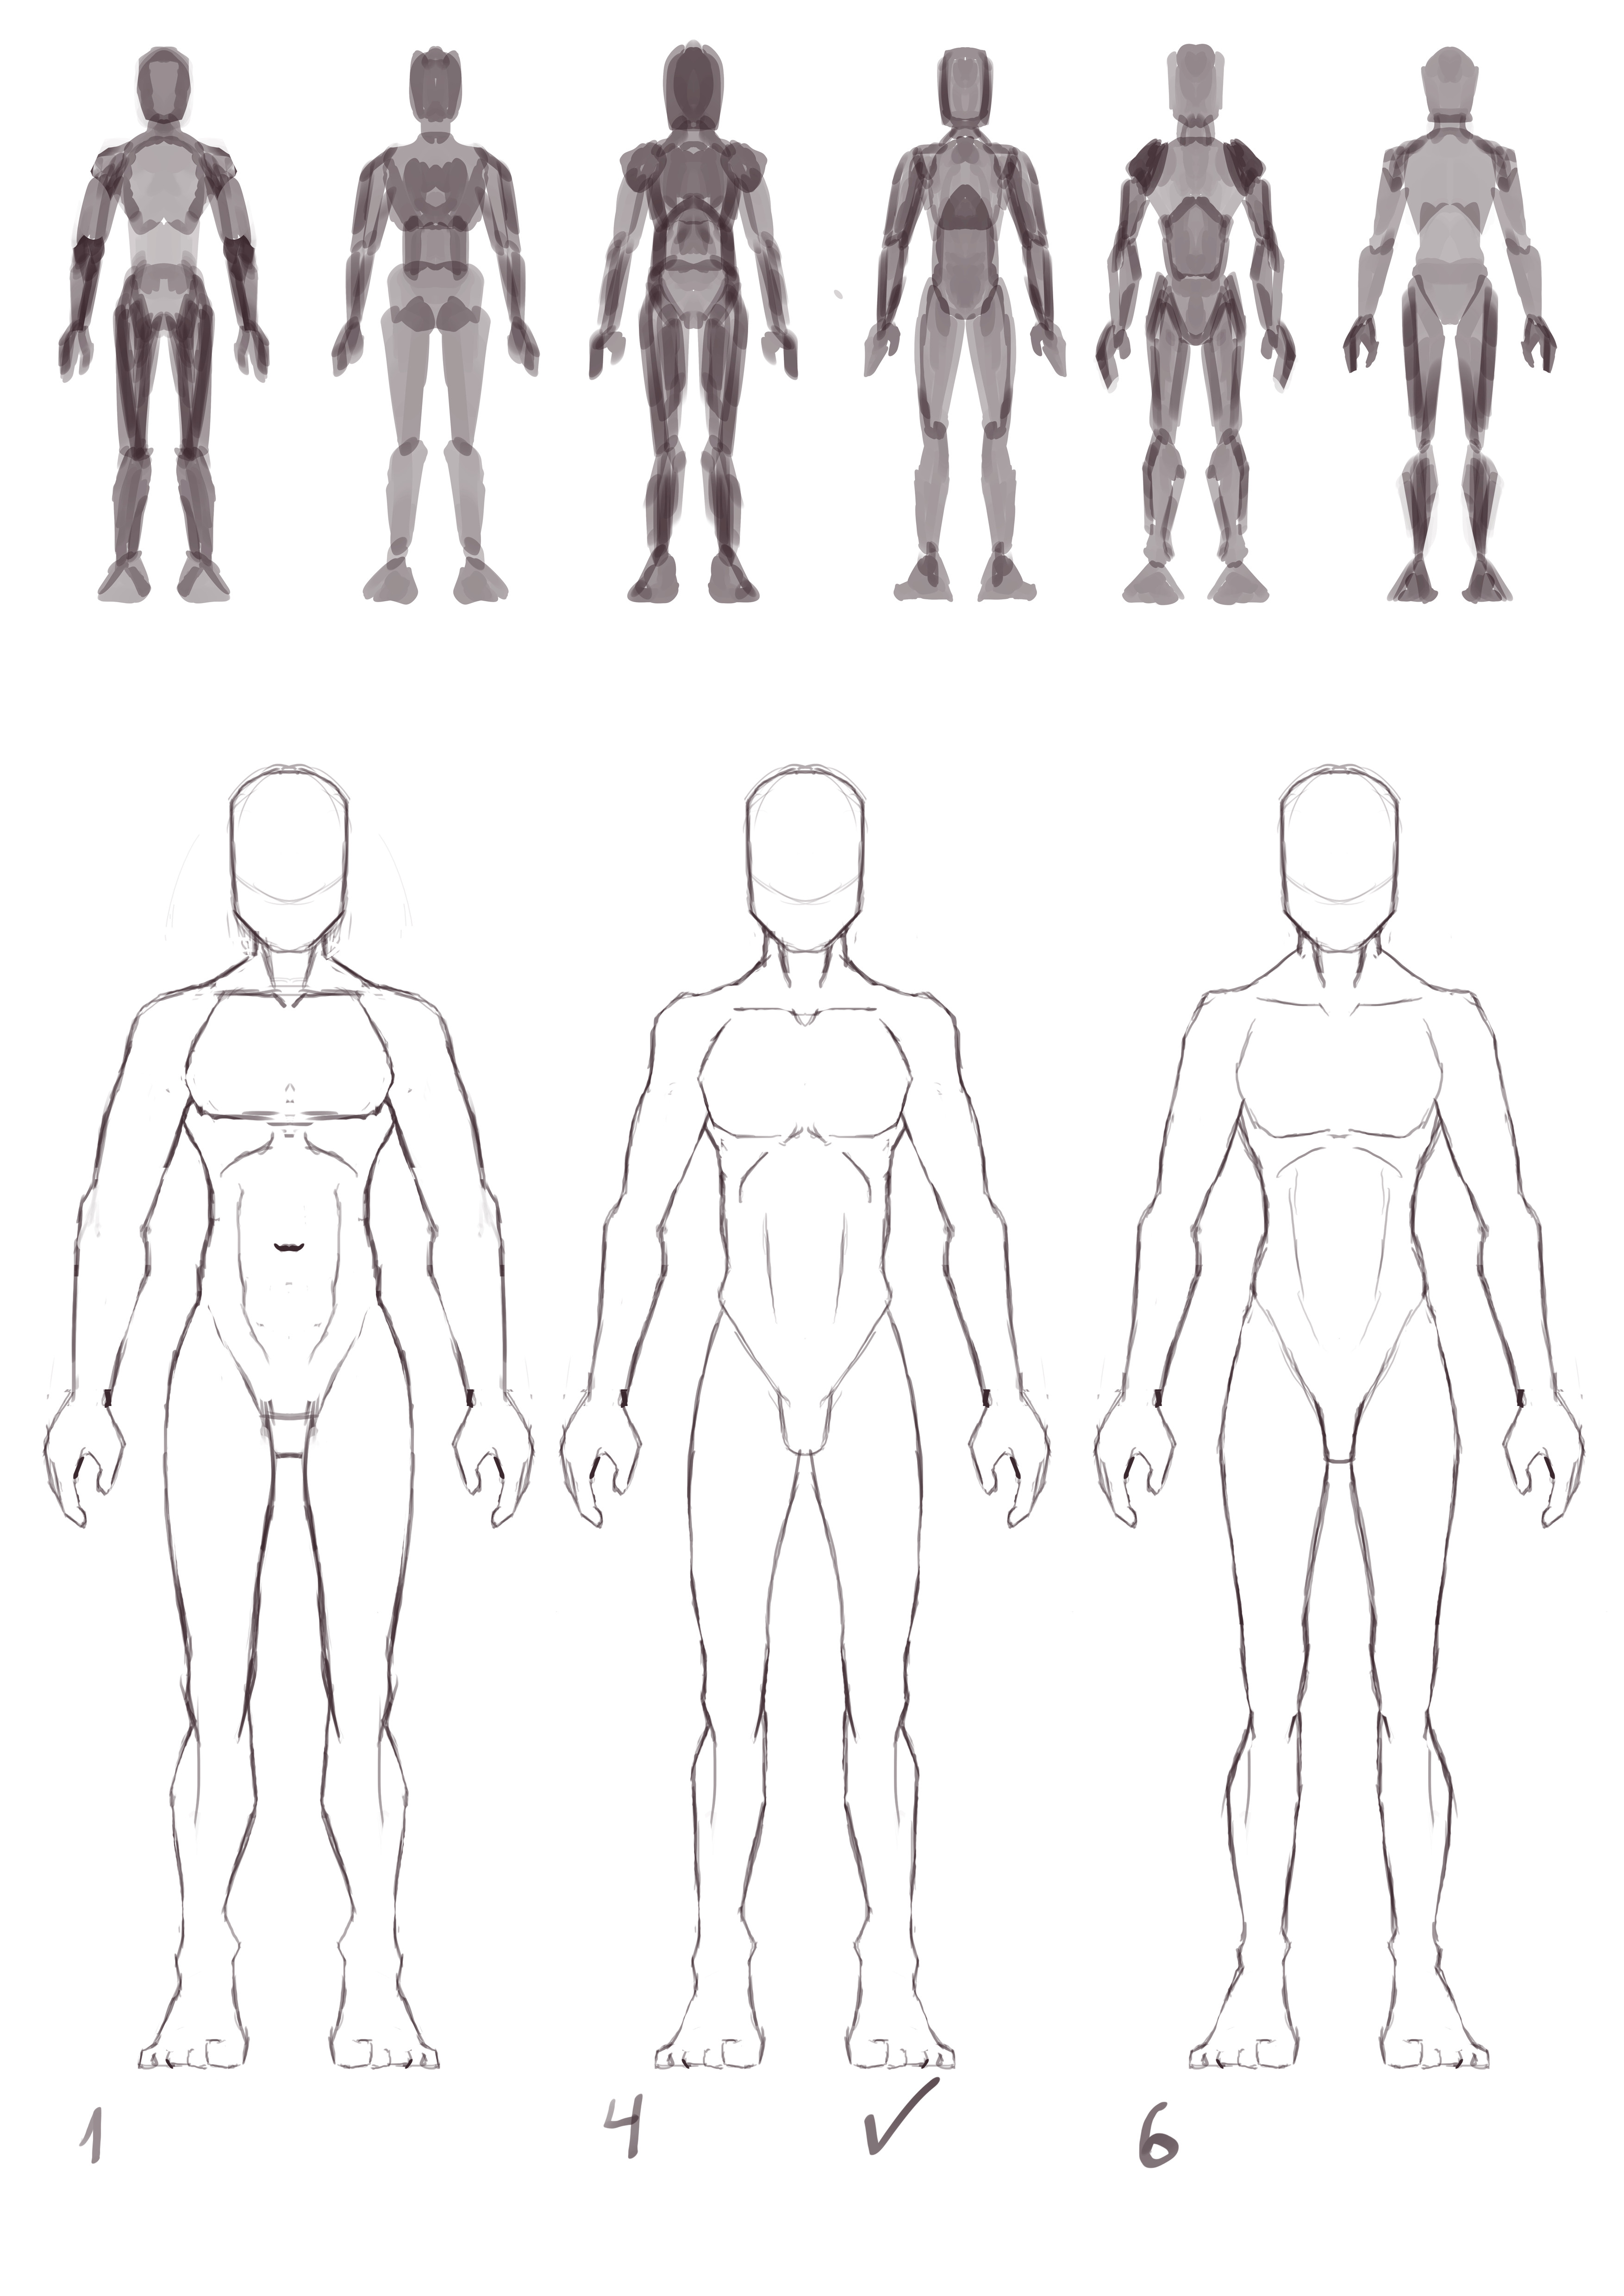 Body sketches and thumbs